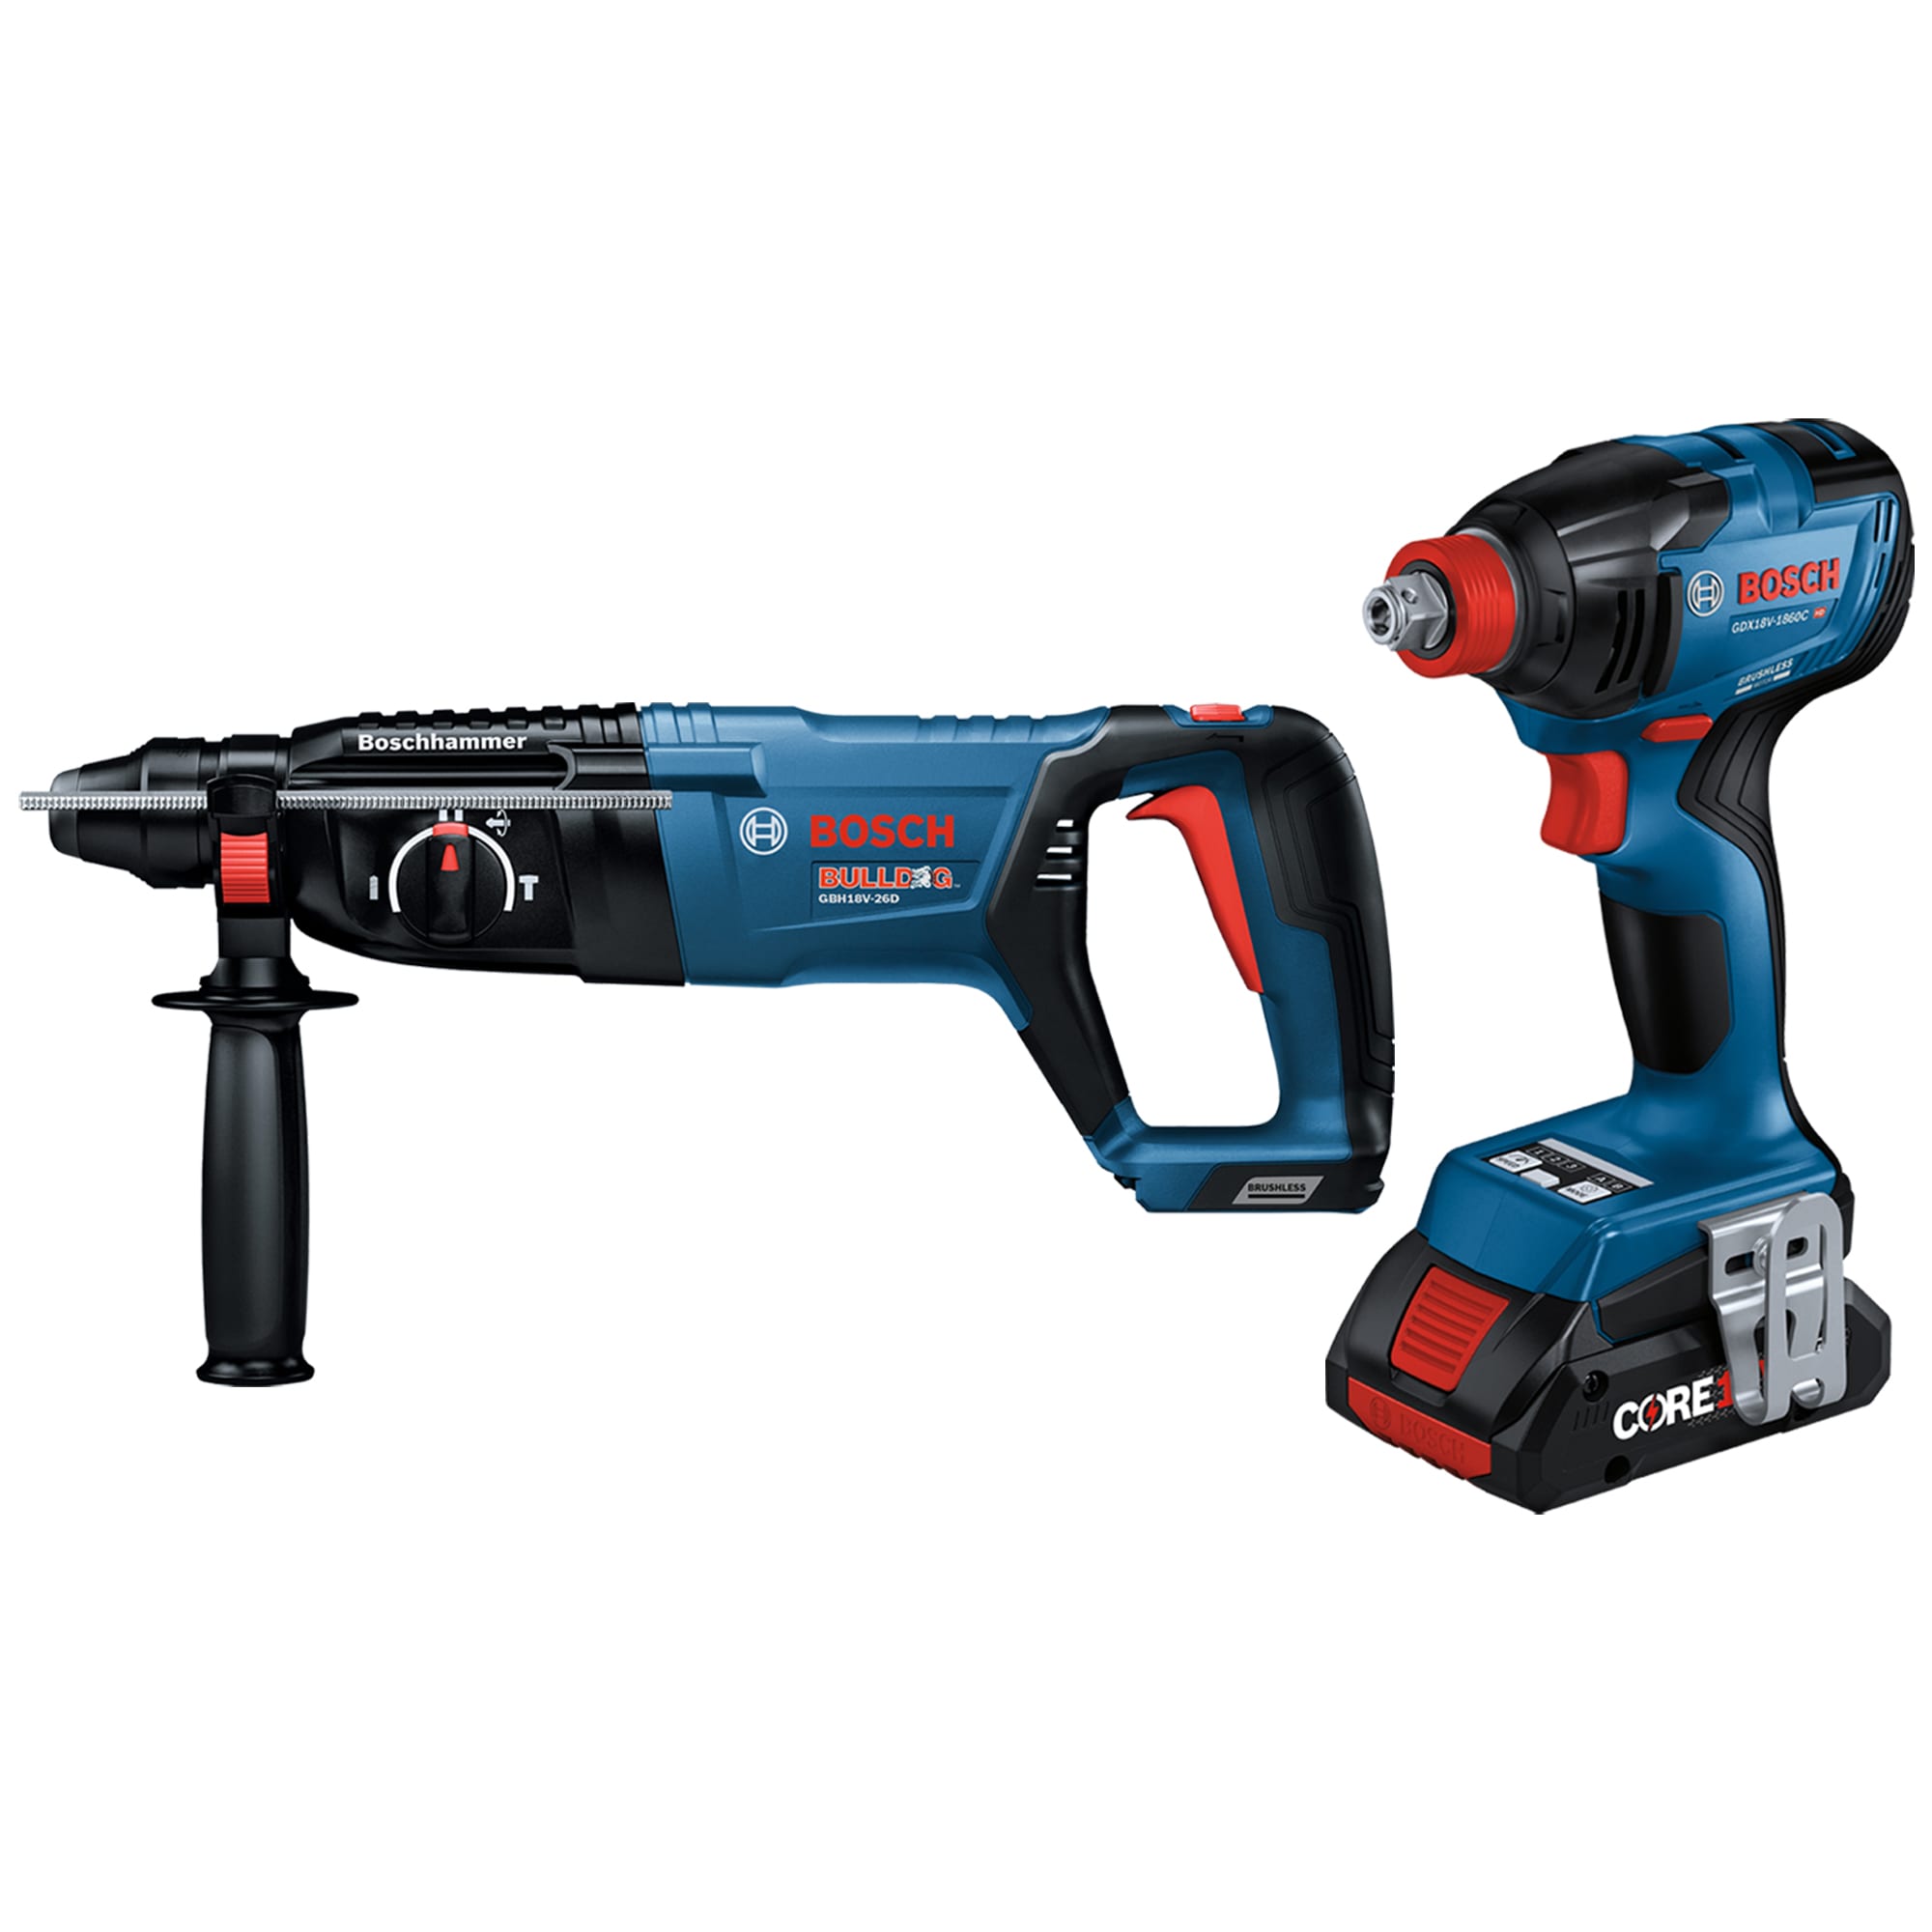 Bosch Bosch Bulldog 18V SDS-Plus Cordless Rotary Hammer Drill (Tool Only), & 1/4 In and 1/2 In Two-In-One Bit/Socket Impact Driver (Tool Only)